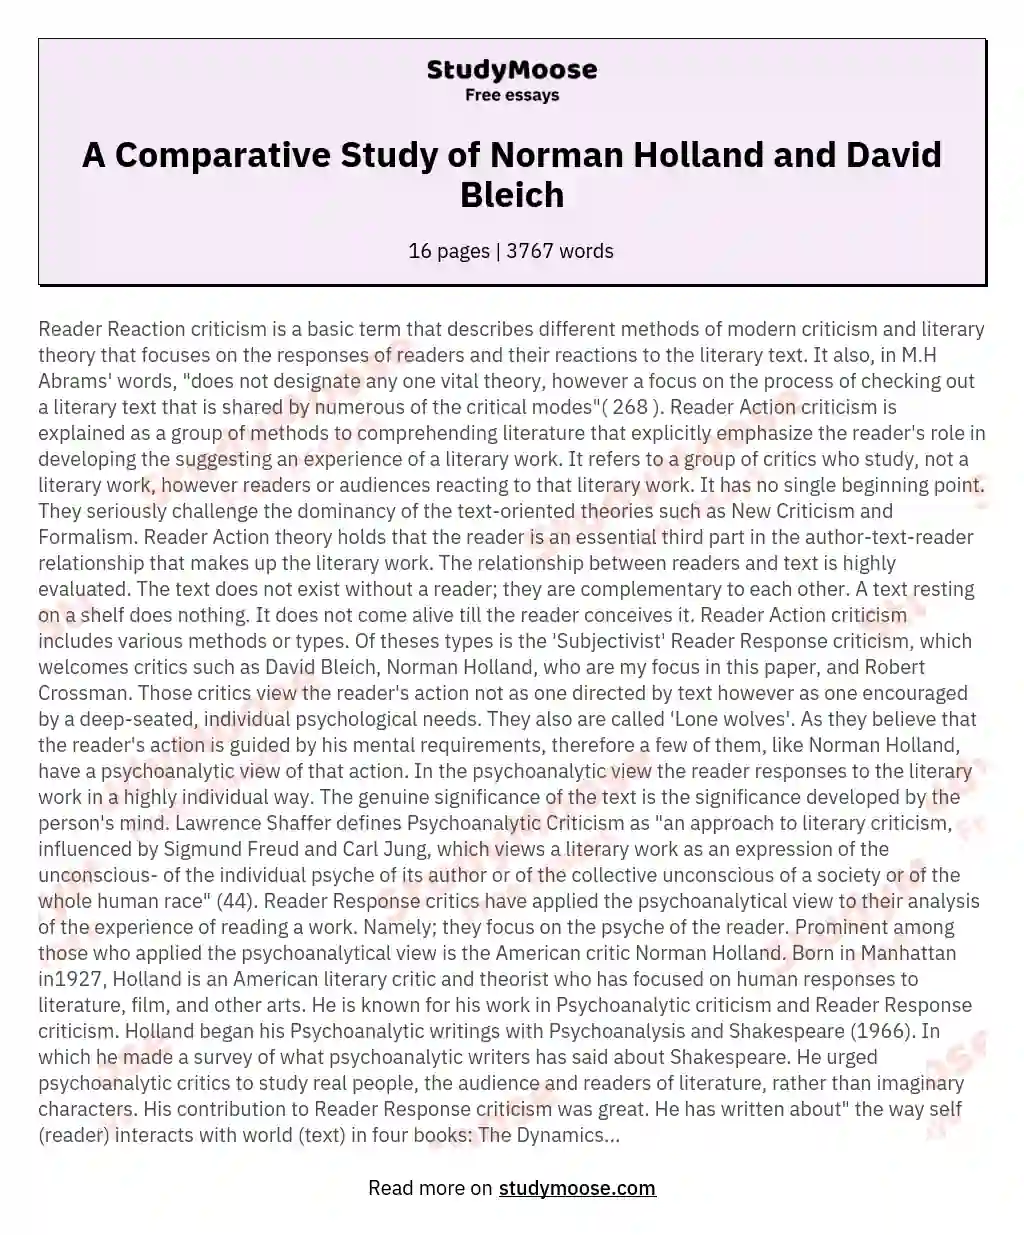 A Comparative Study of   Norman Holland and David Bleich essay